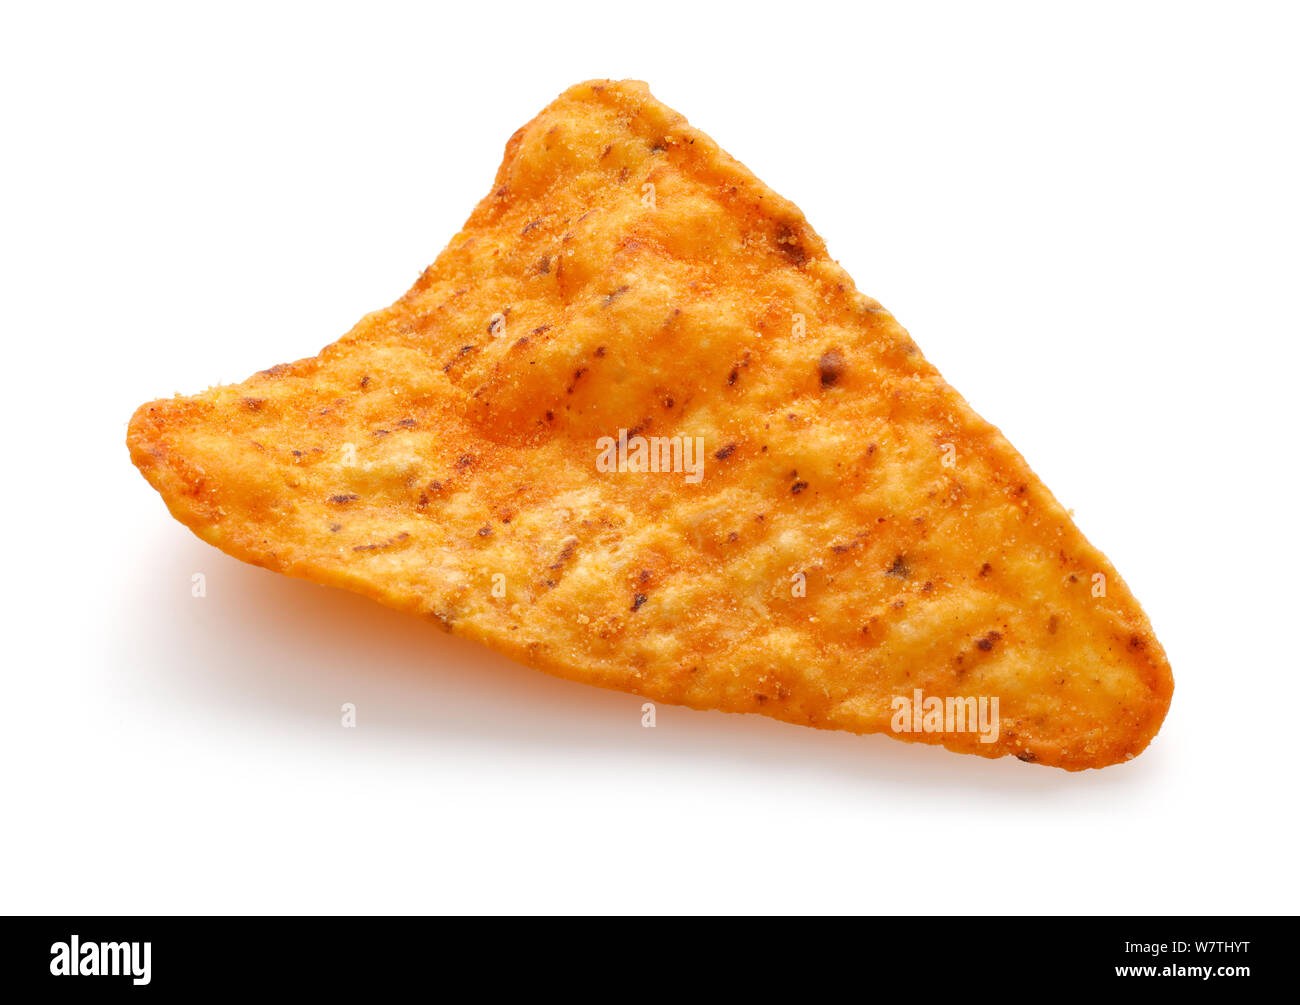 Single corn tortilla chip isolated on white background Stock Photo